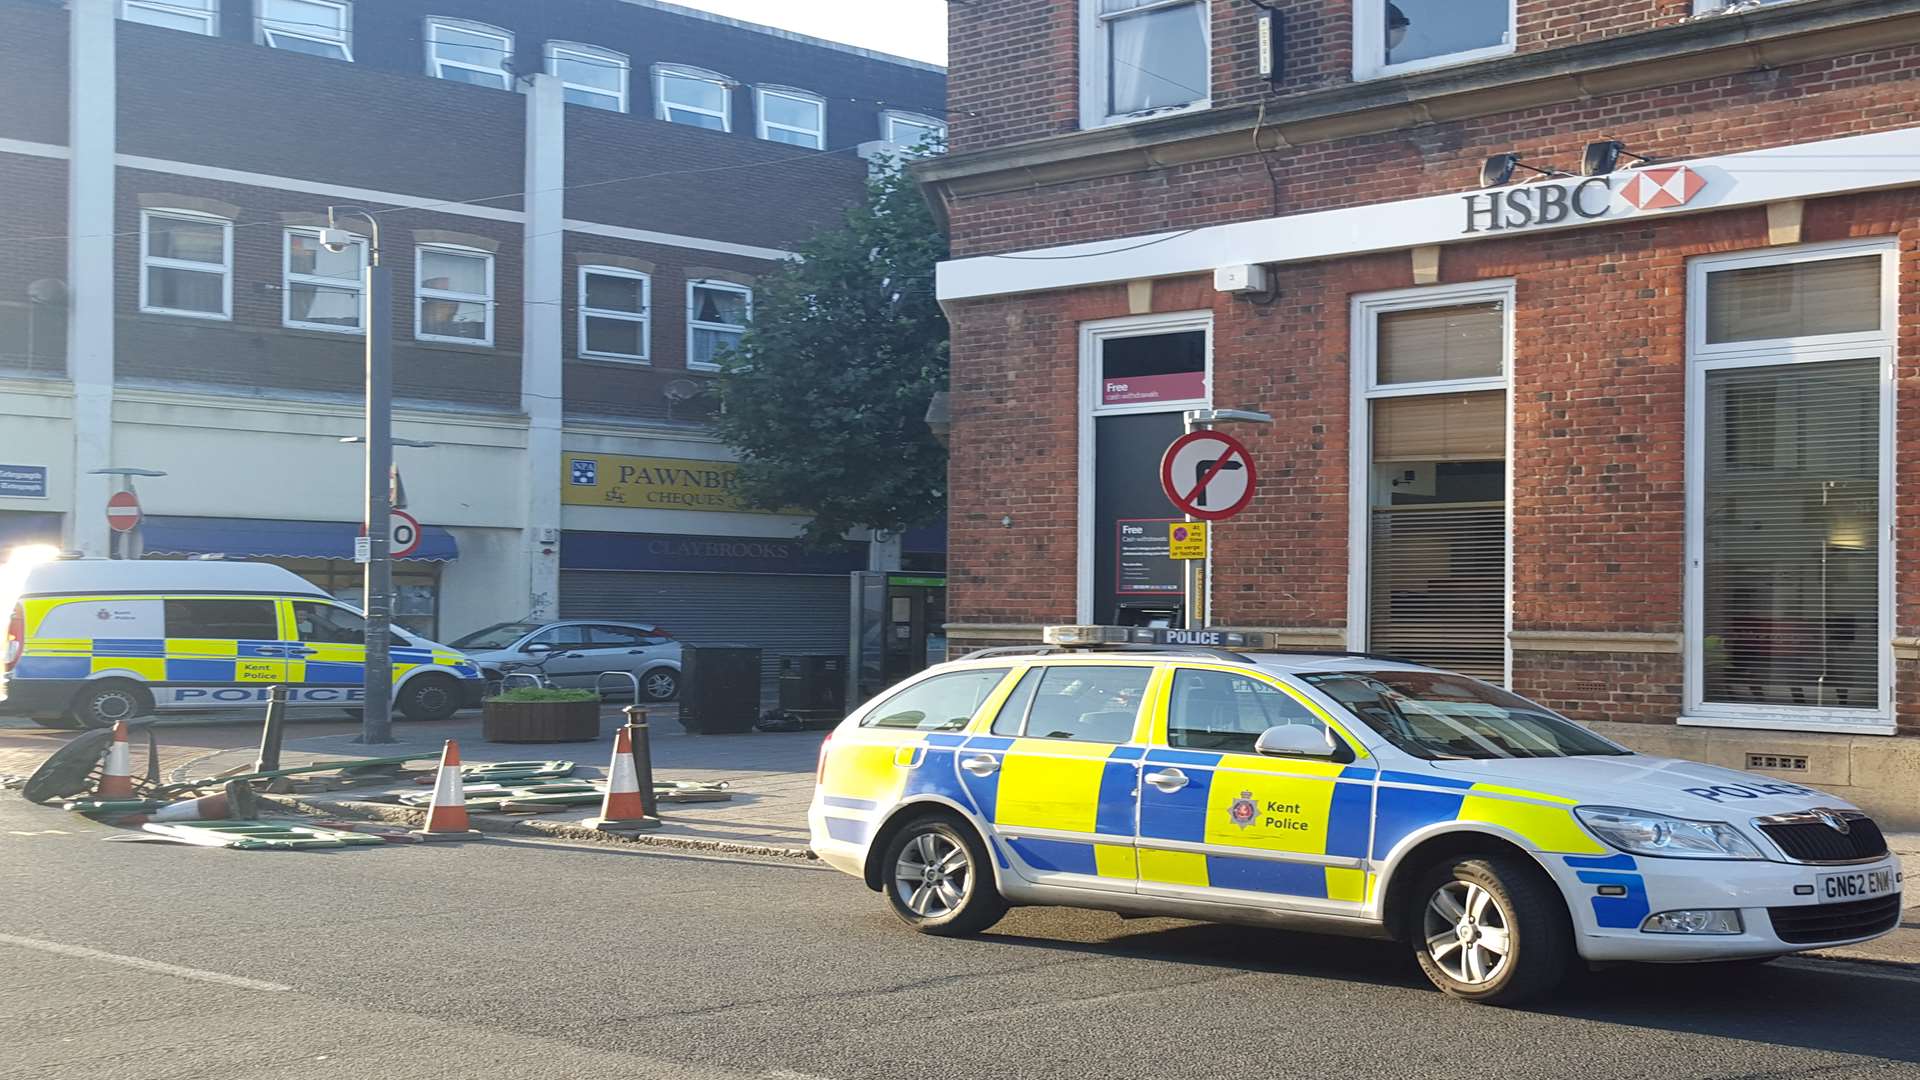 Police were called to HSBC bank